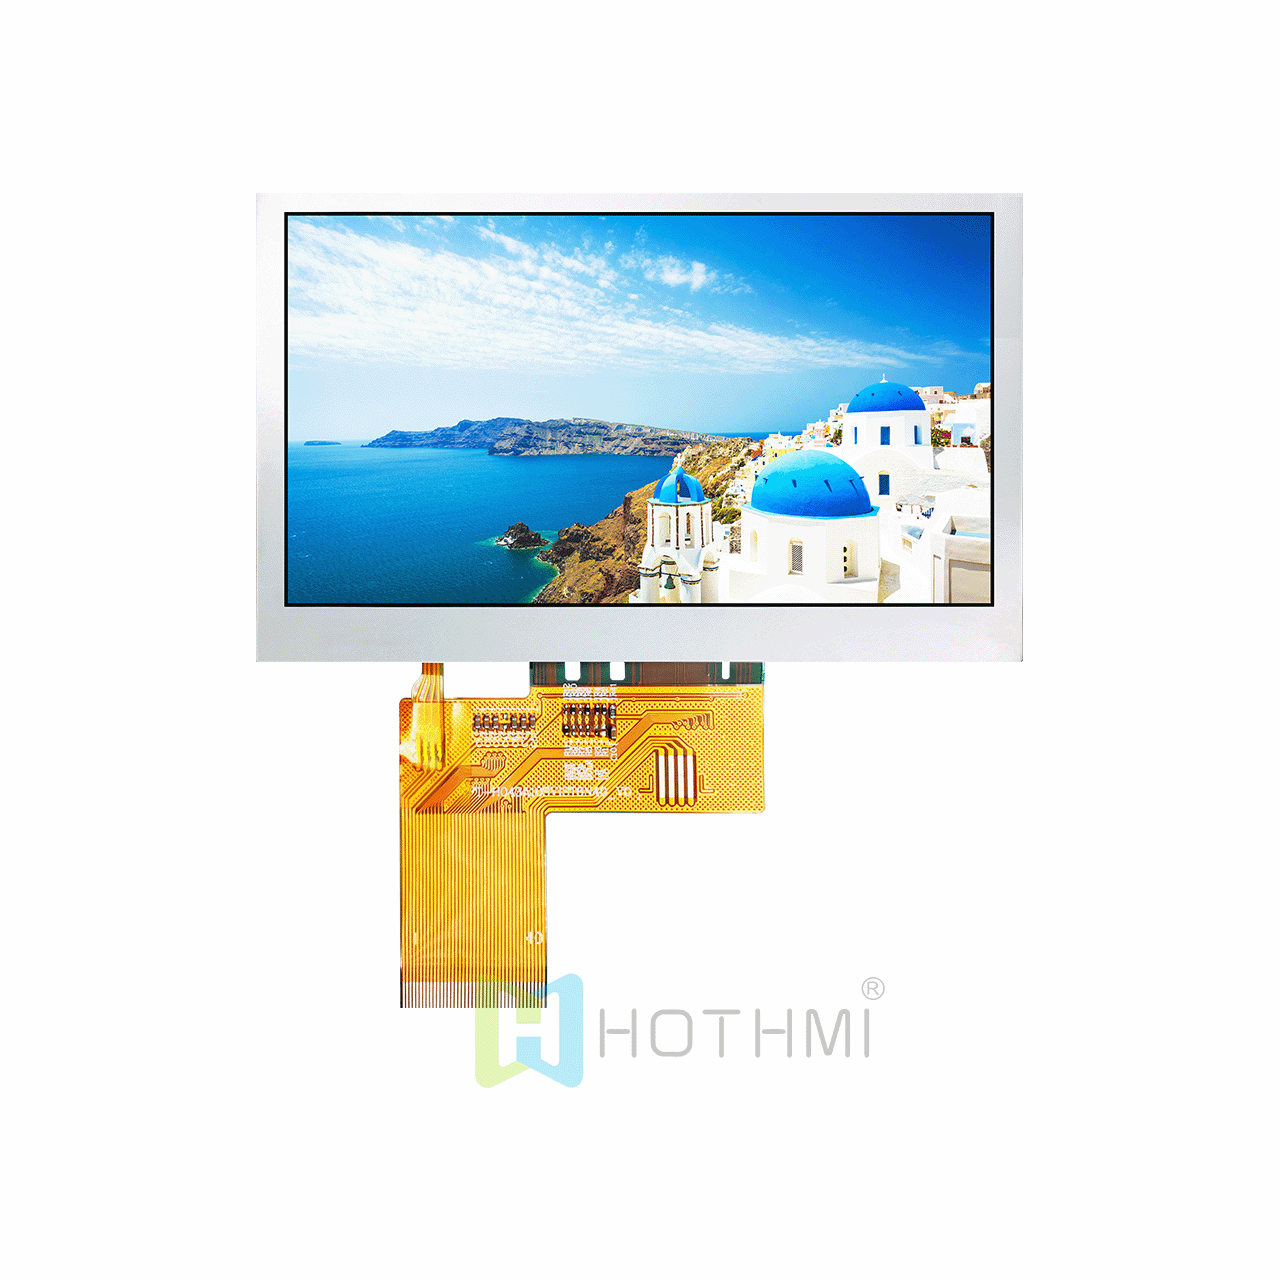 4.3 inch TFT LCD display module 800x480 dot matrix wide temperature IPS full viewing angle sunlight readable RGB compatible with industrial computers